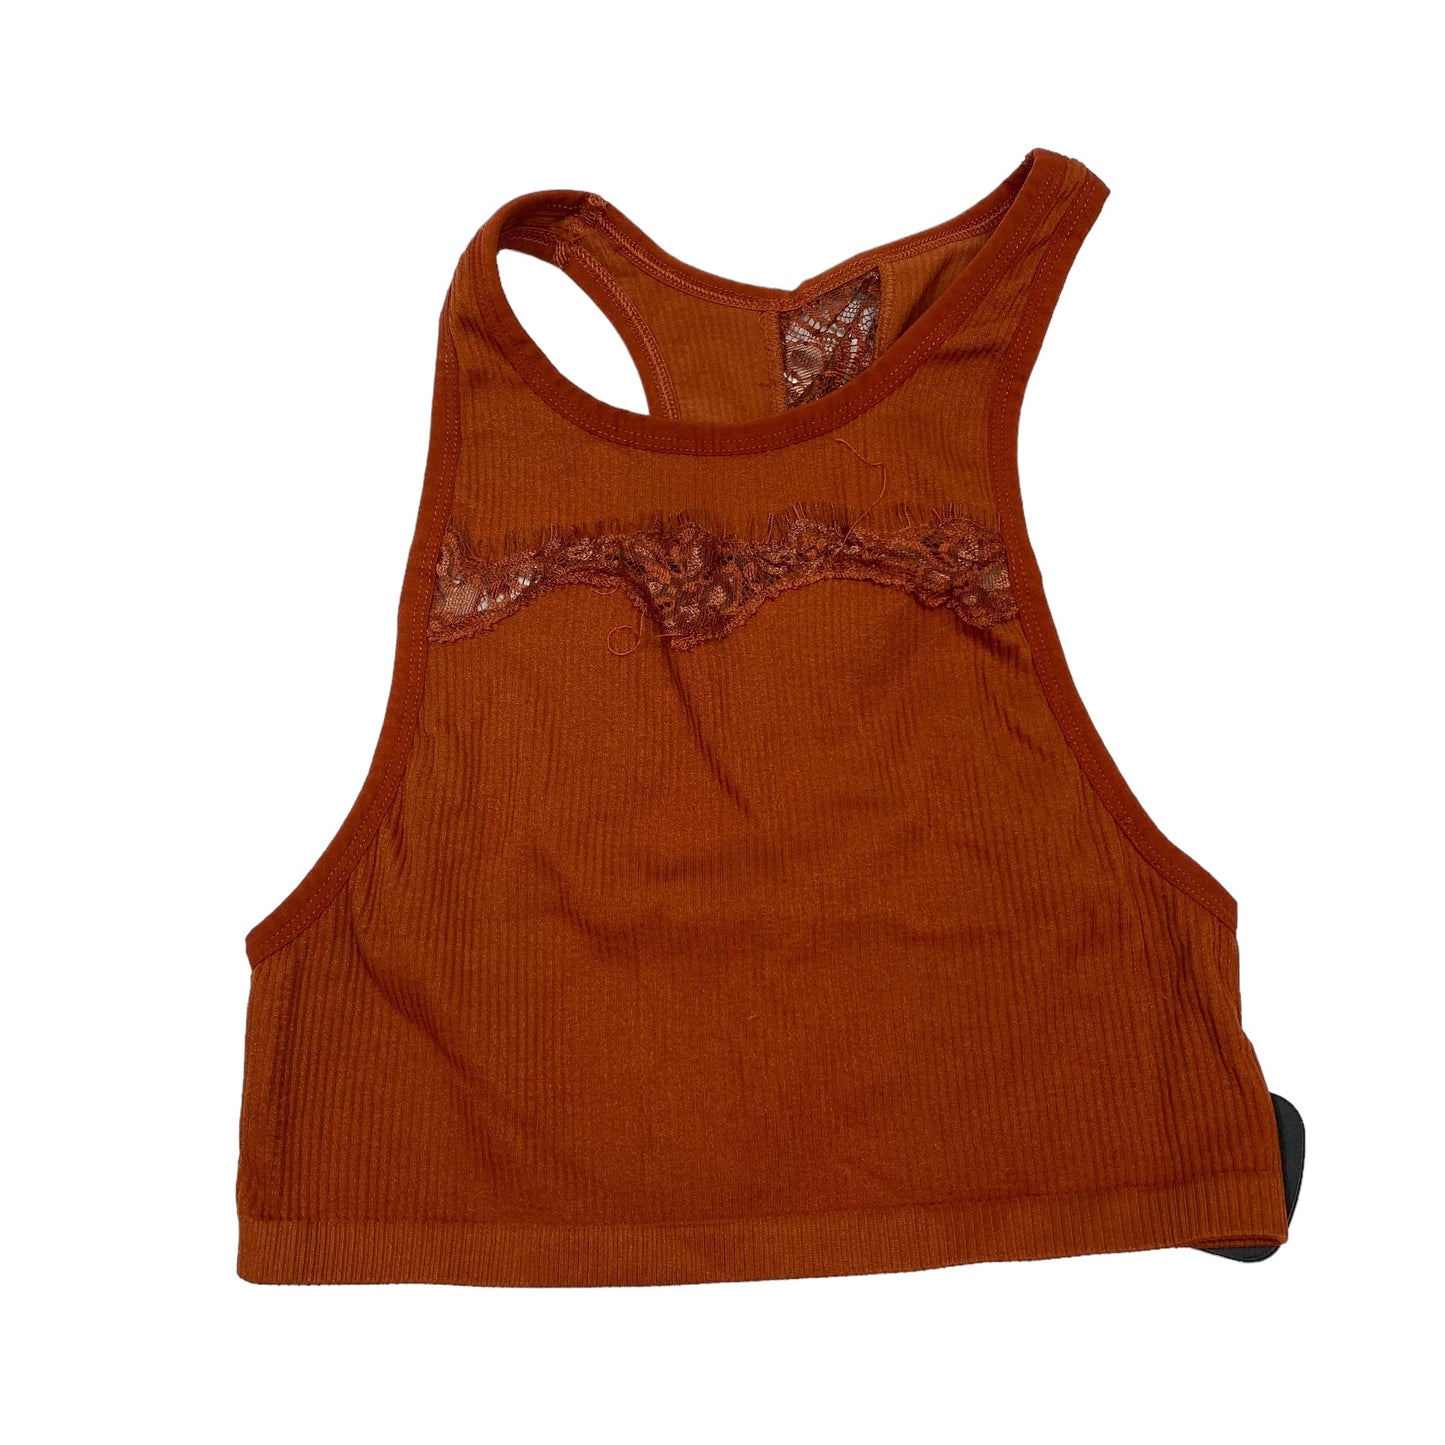 Orange Bralette Urban Outfitters, Size Xs